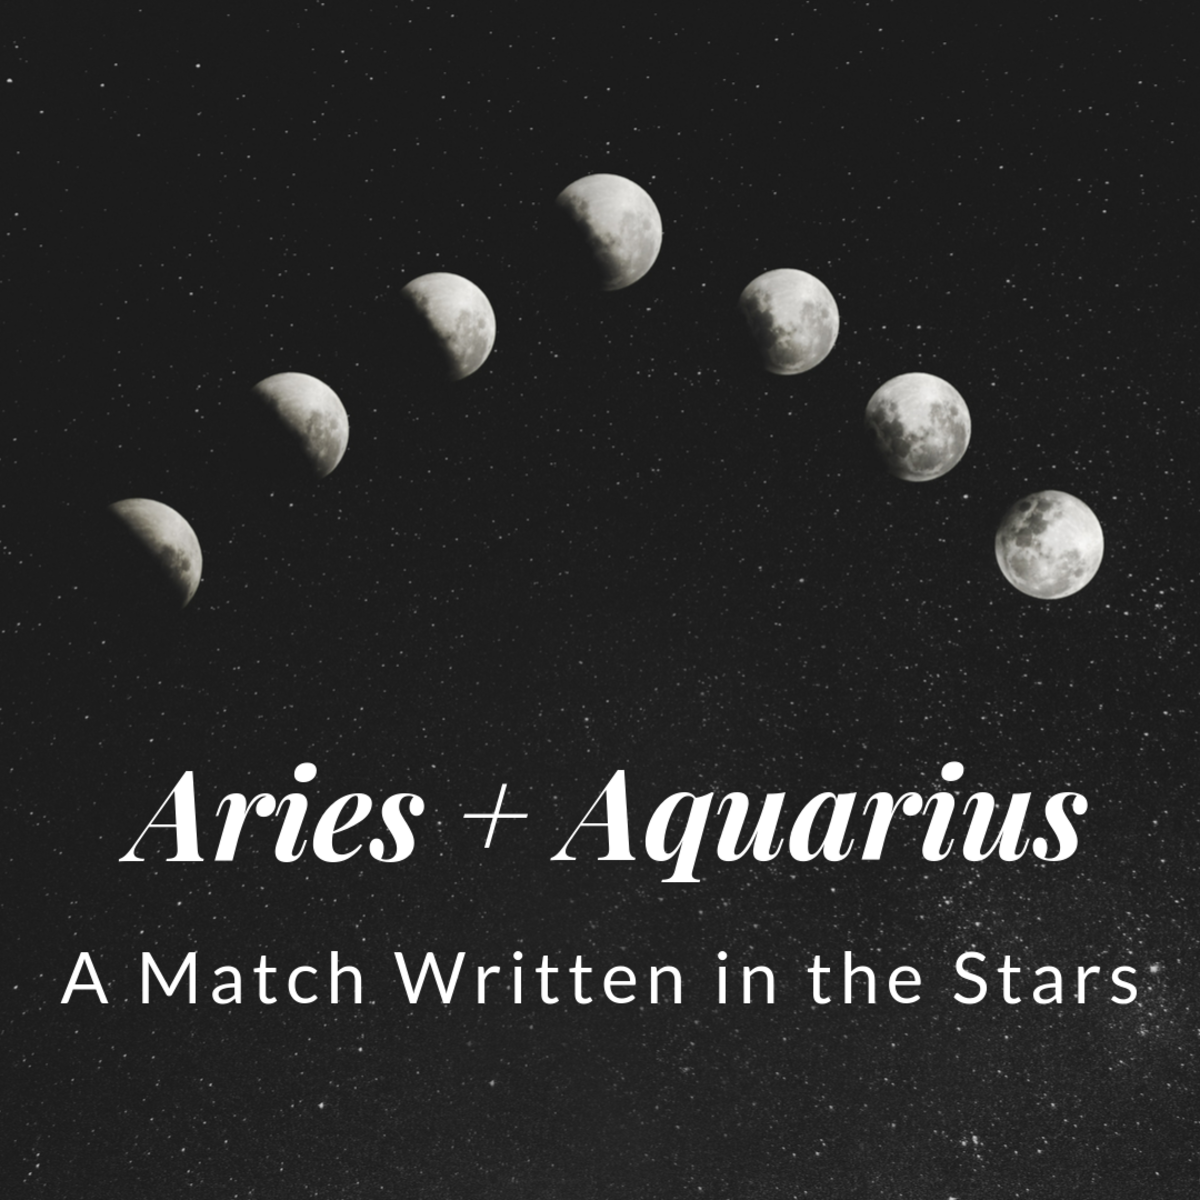 Is an Aquarius and Aries a good match?